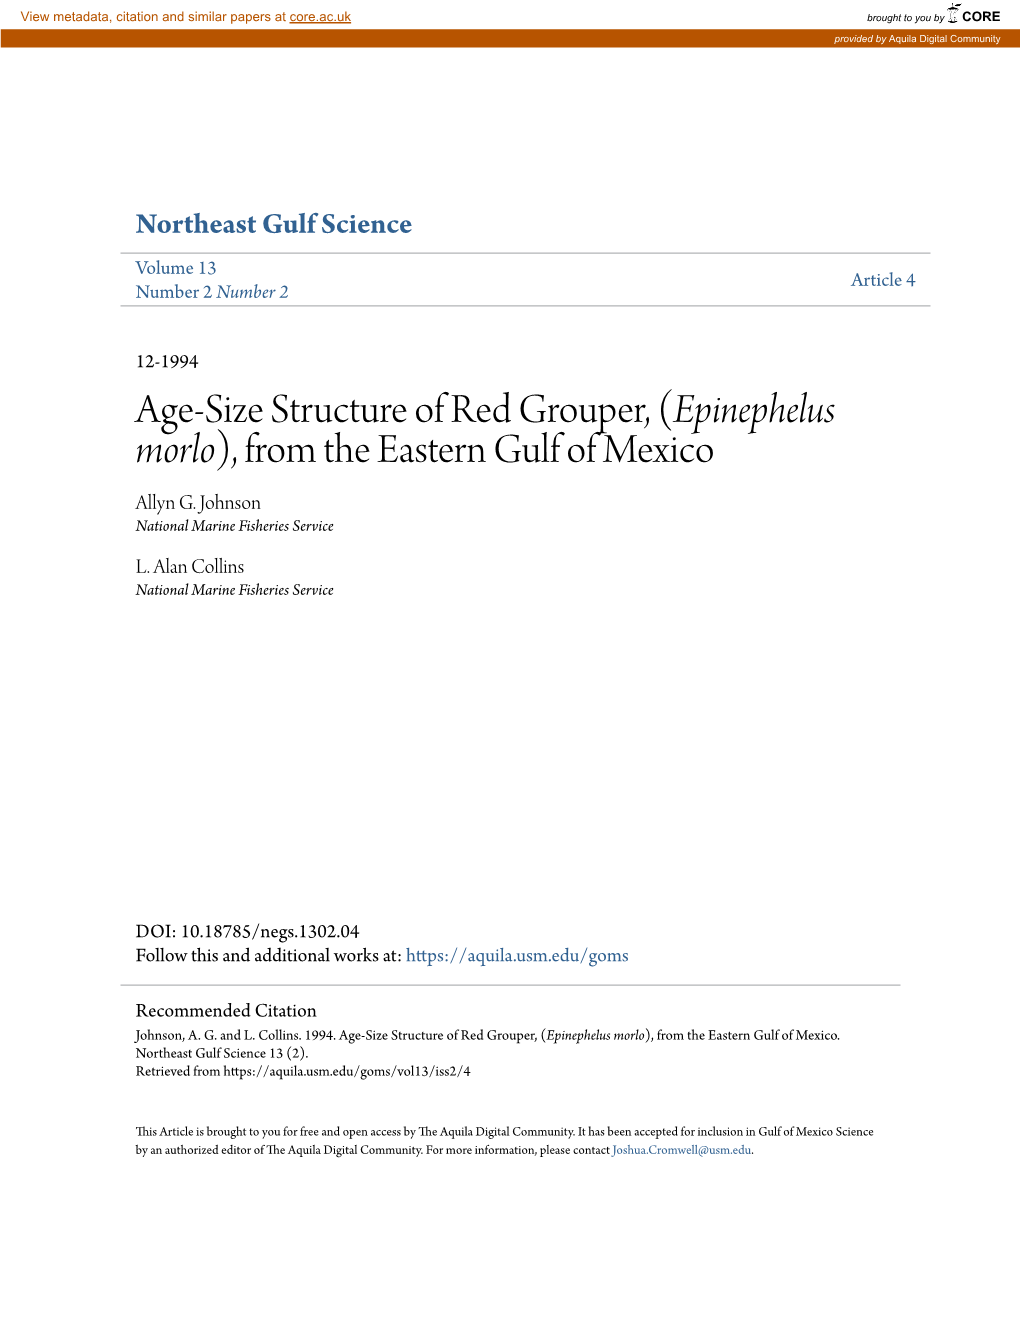 Age-Size Structure of Red Grouper, (Epinephelus Morlo), from the Eastern Gulf of Mexico Allyn G